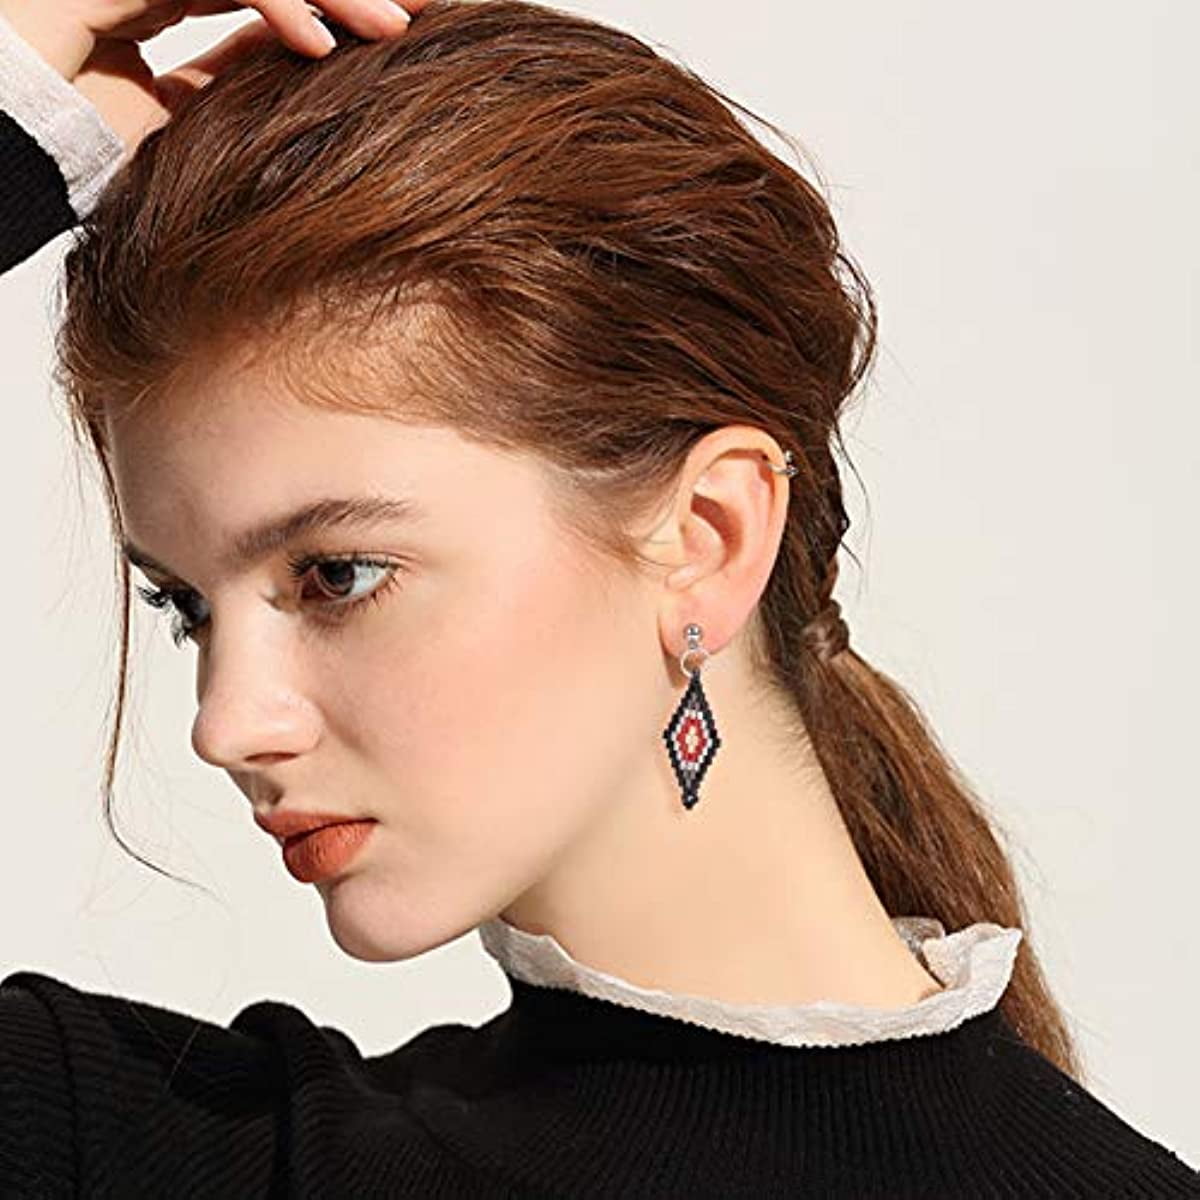 224pcs Earring Studs for Jewelry Making,Gold Plated Stud Earrings  Hypoallergenic Stud Earring with Loop Stainless Steel Earring Posts with  Ear Nut for